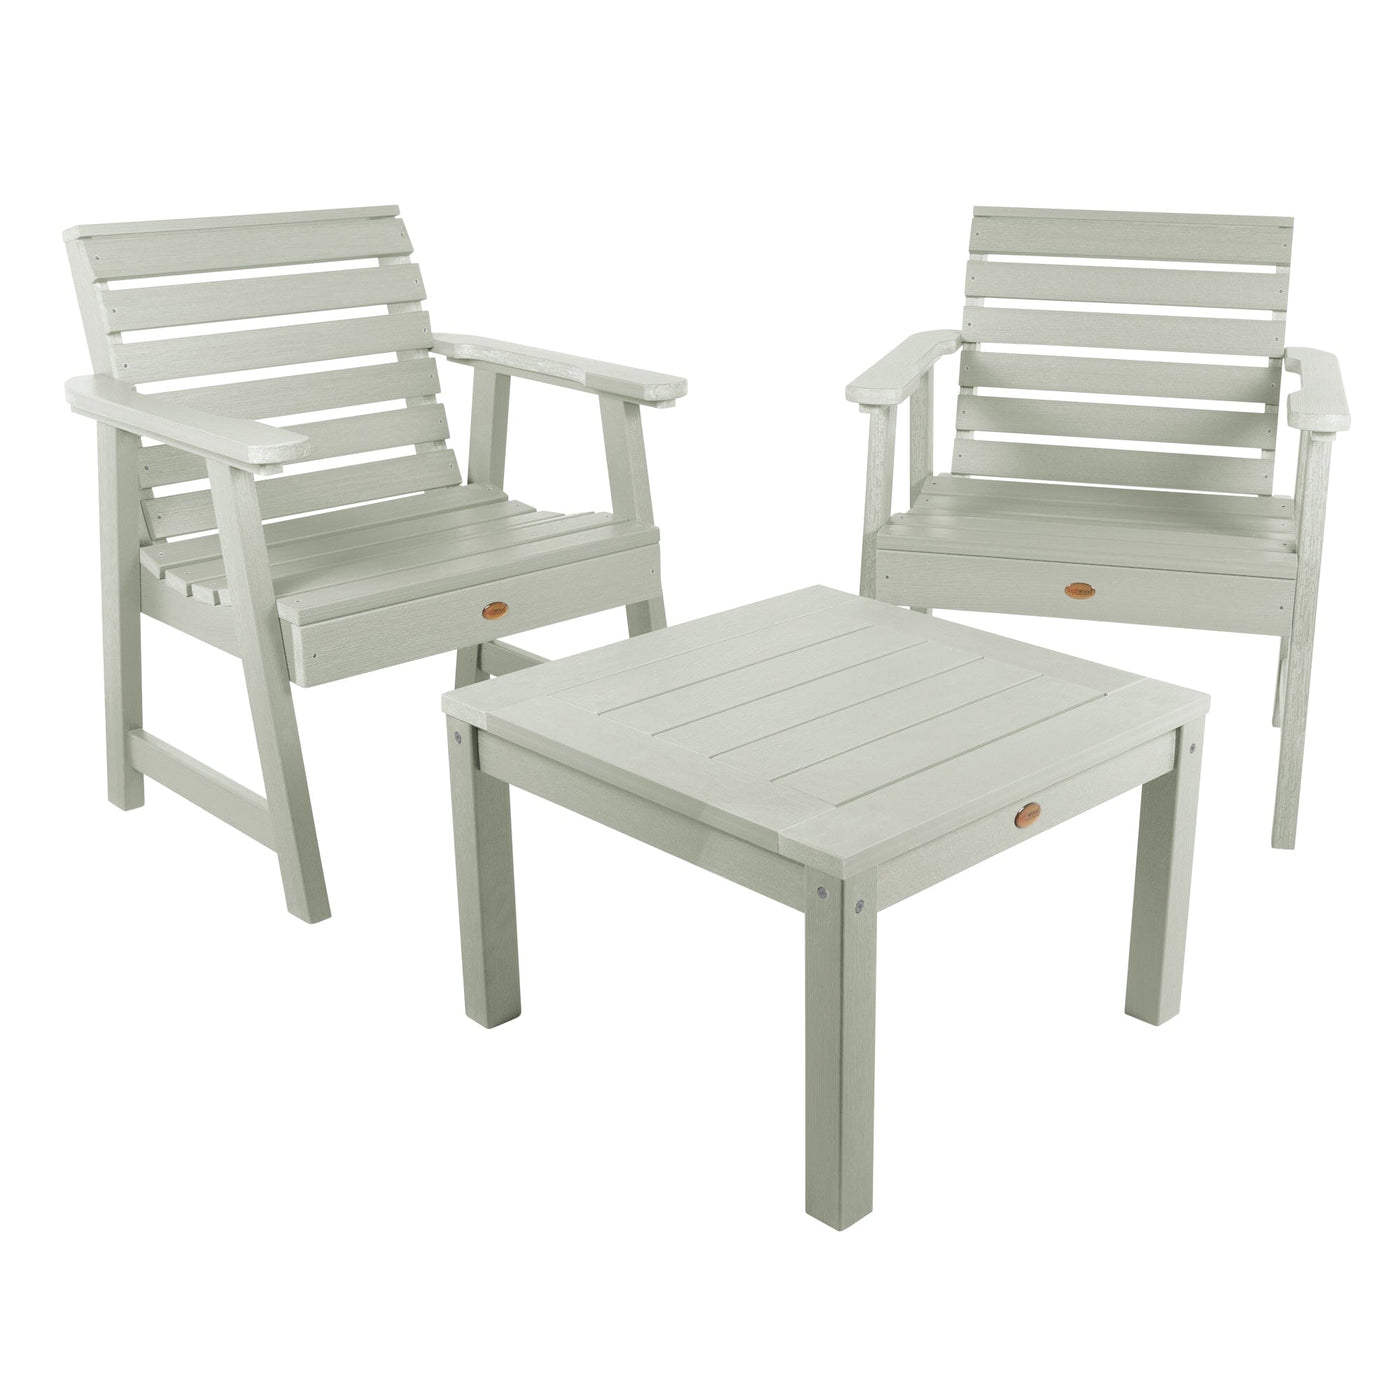 2 Weatherly Garden Chairs with Square Side Table Kitted Sets Highwood USA Eucalyptus 